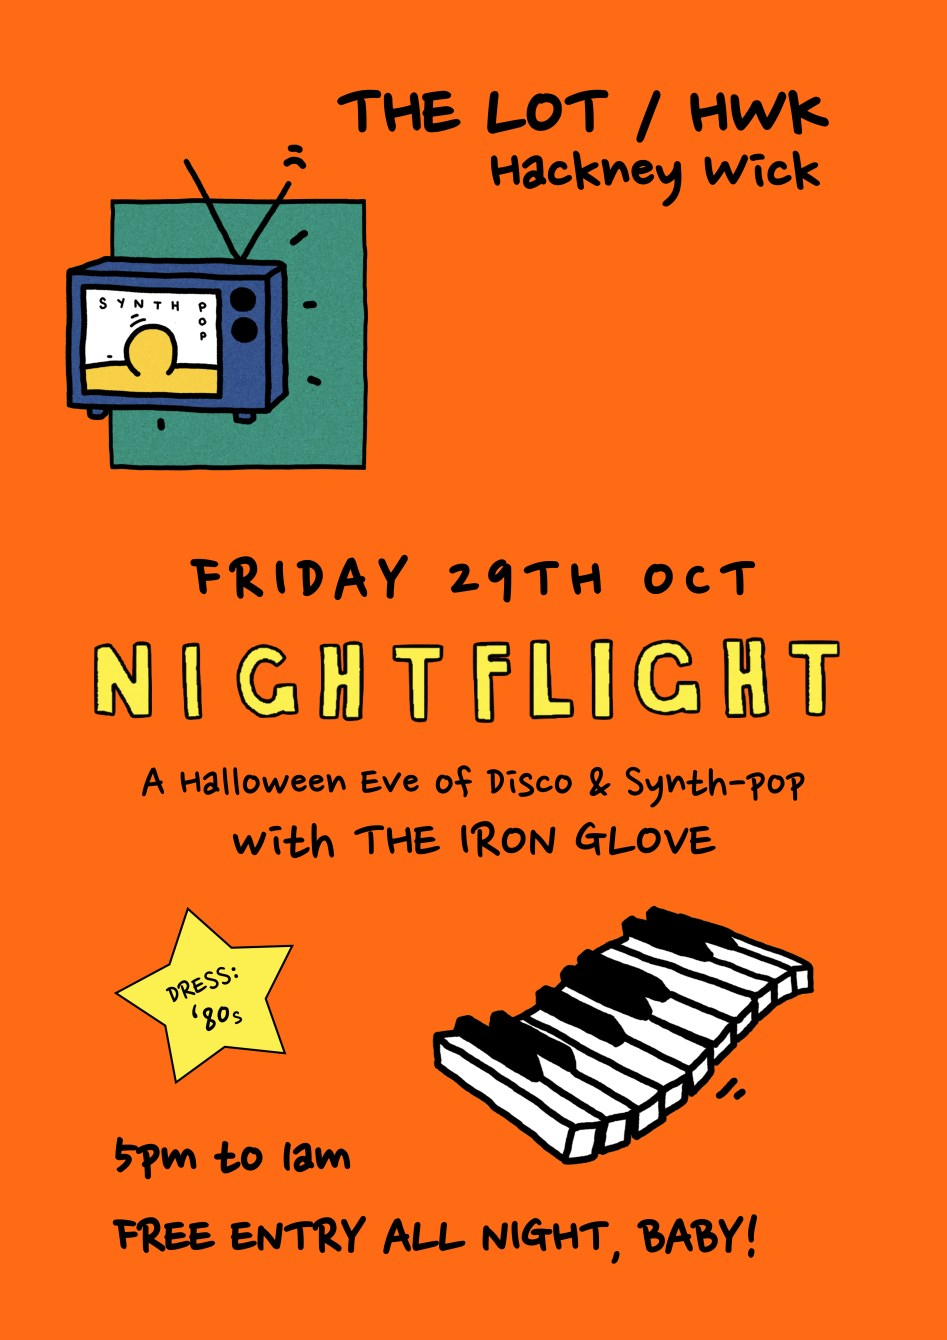 Nightflight Halloween Party: An Extended Evening of Synth pop, Italo and Disco (Free Entry) - Flyer back